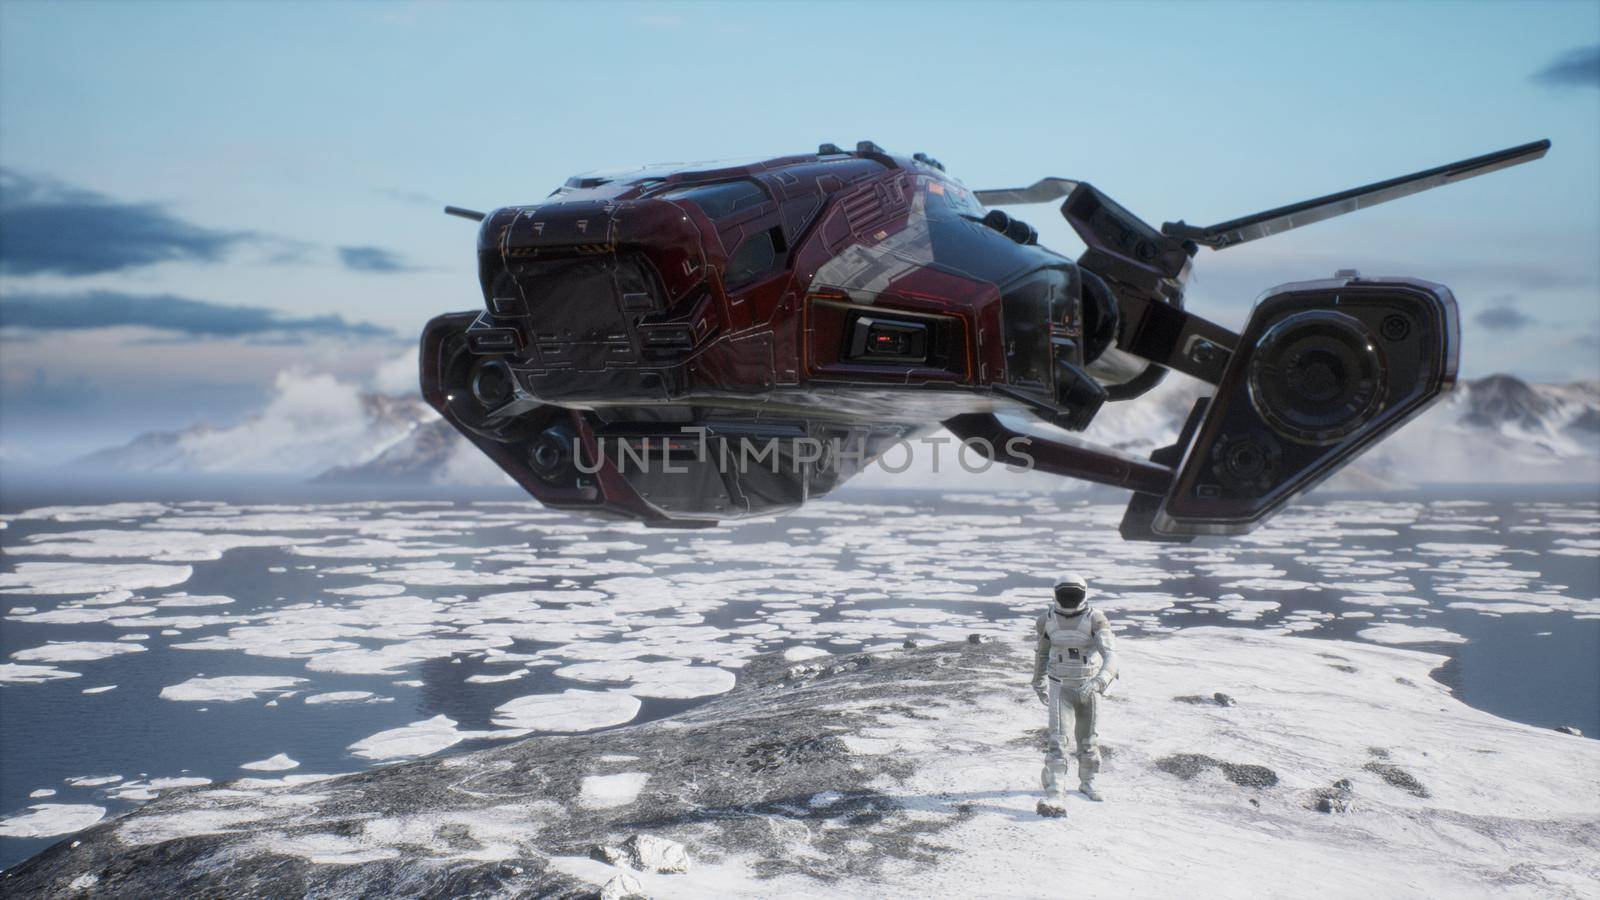 The astronaut landed on a new unknown planet, covered with ice and snow. 3D Rendering by designprojects